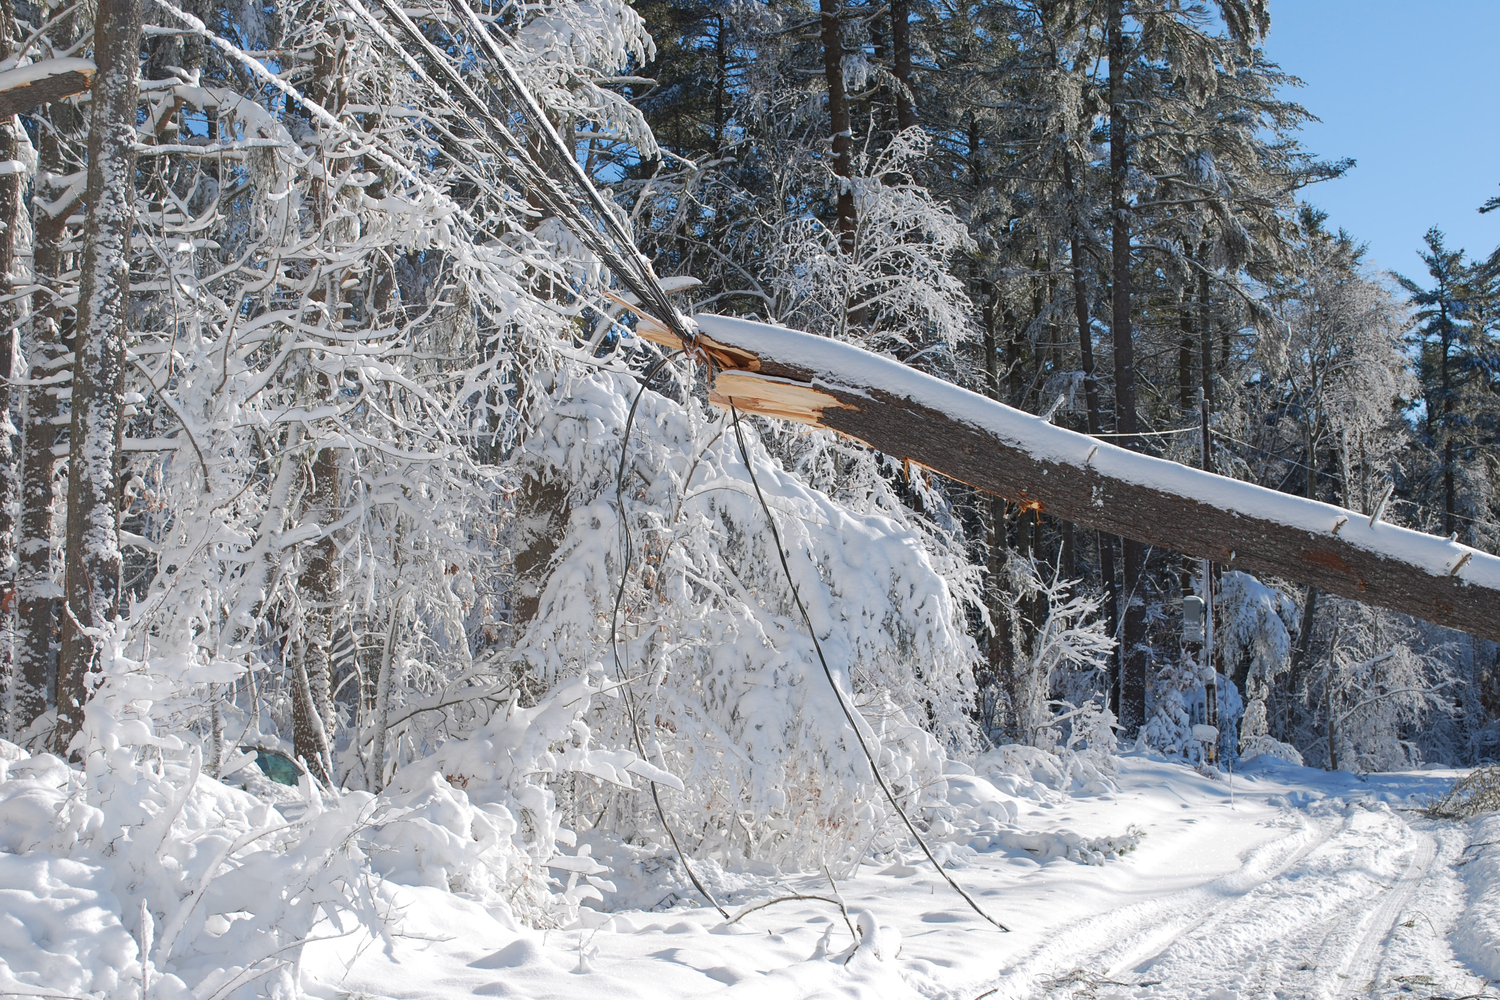 Ice Storms and the Damage They Can Cause